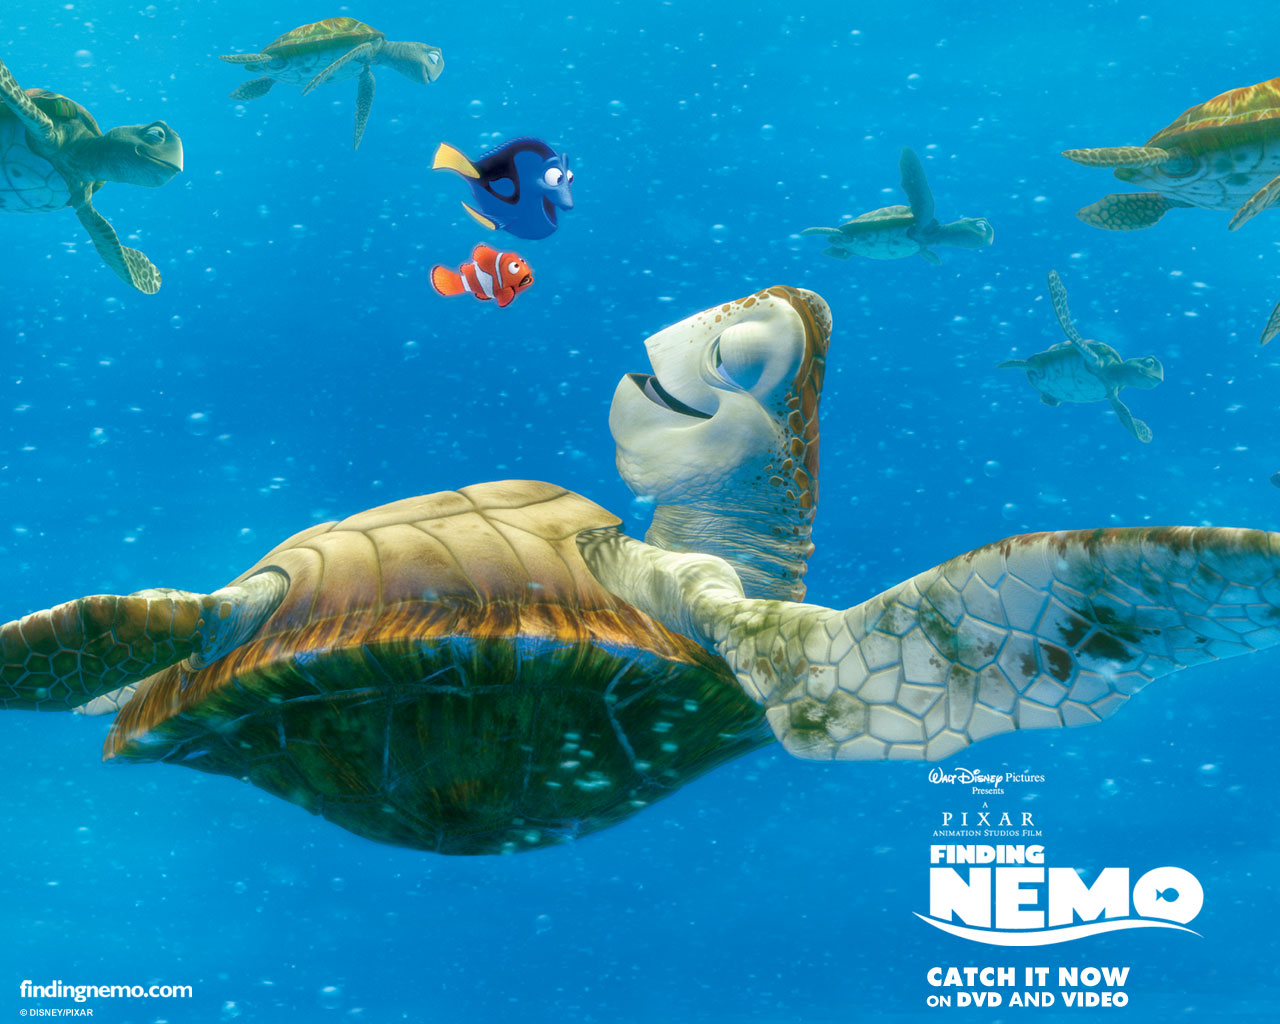 Finding Nemo Disney Pixar All Rights Reserved